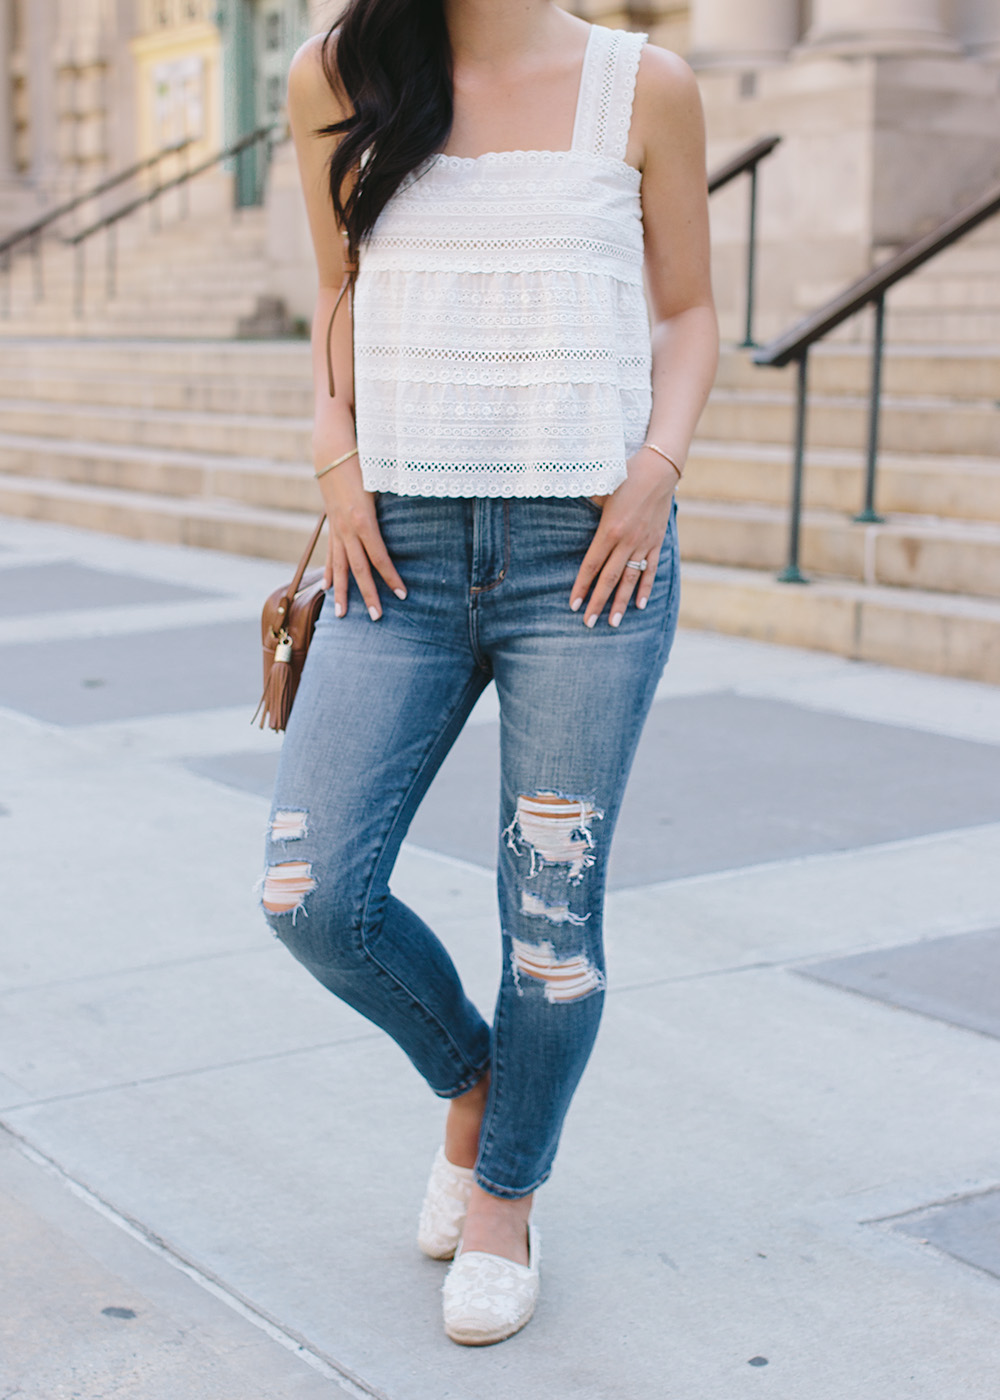 Summer Outfit / Eyelet Top & Ripped Jeans